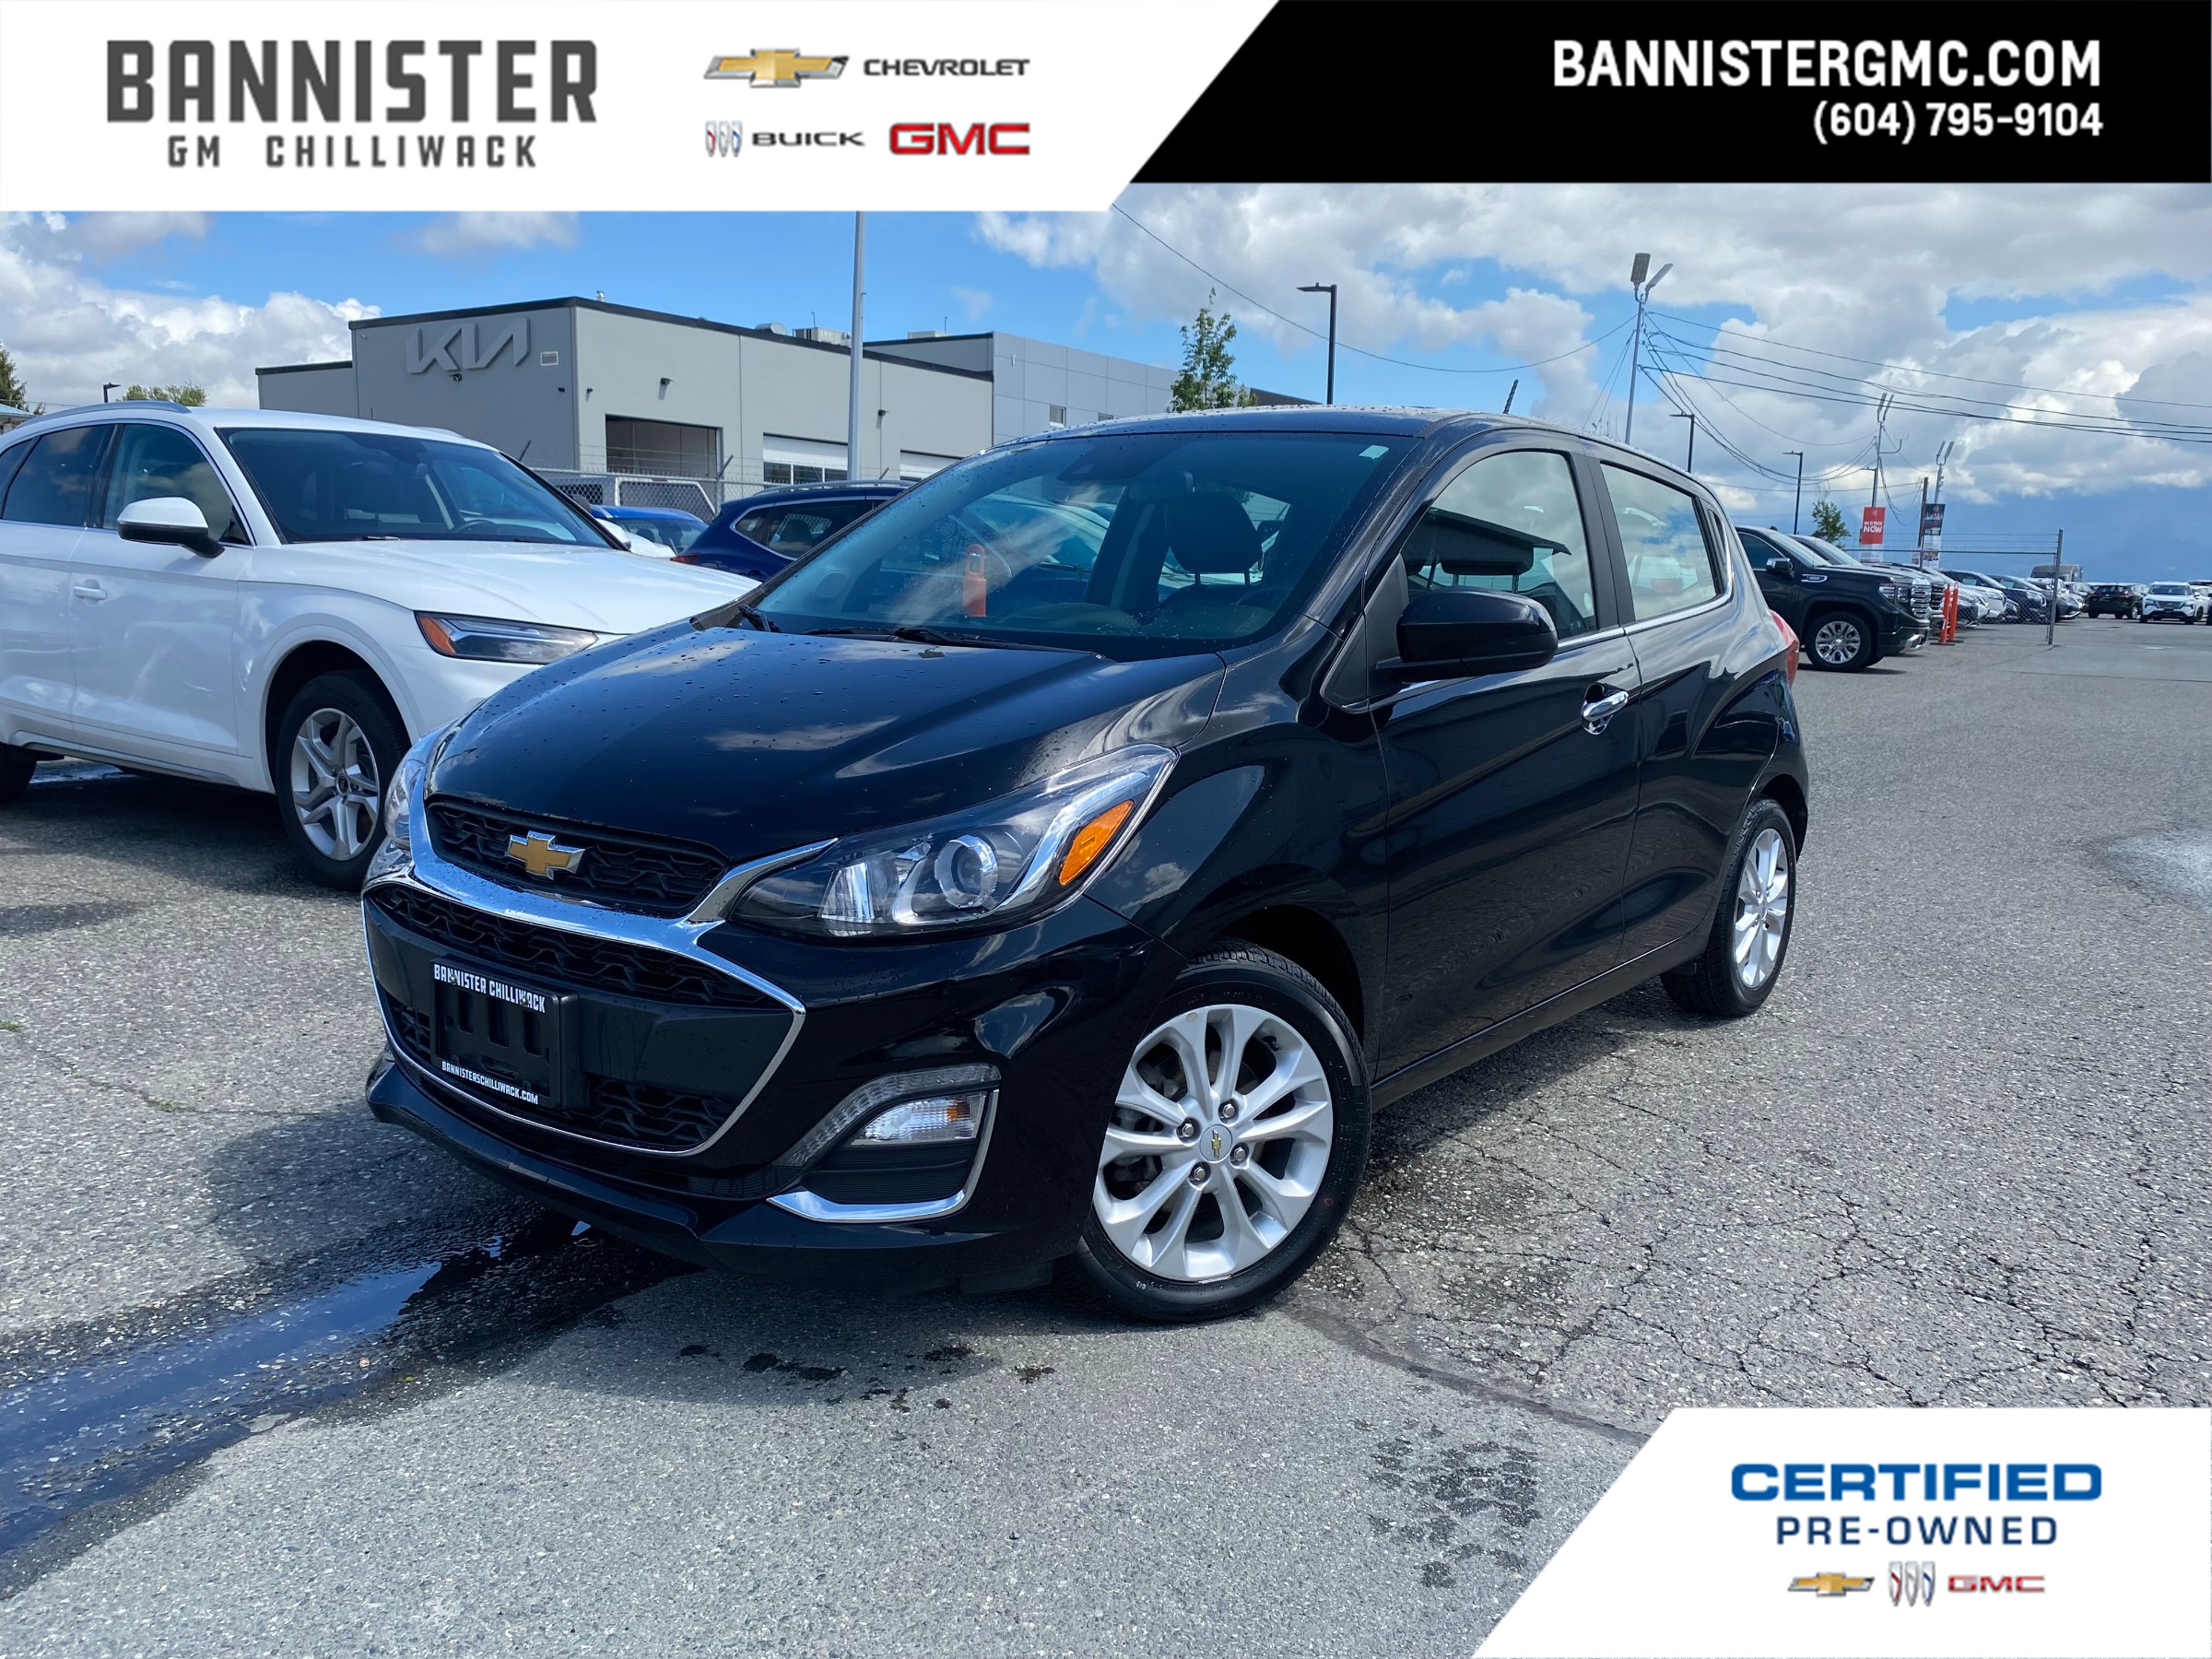 2021 Chevrolet Spark 2LT CVT CERTIFIED PRE-OWNED RATES AS LOW AS 4.99% 